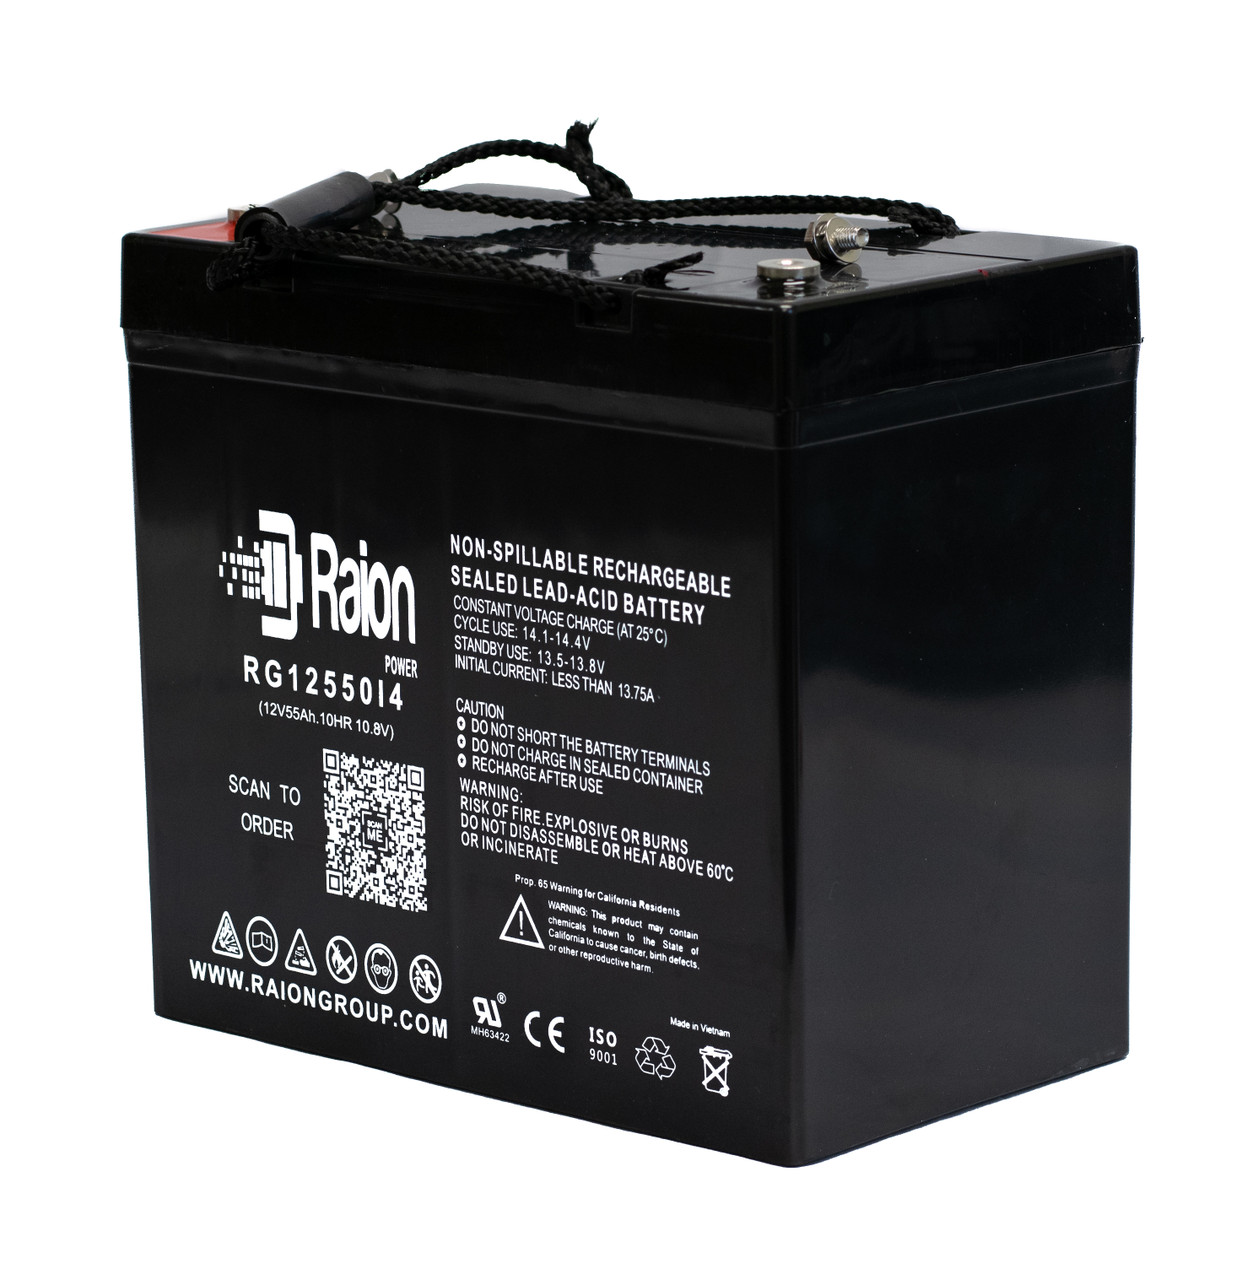 Raion Power 12V 55Ah 22NF Mobility Scooter Battery Replacement for Quickie P110